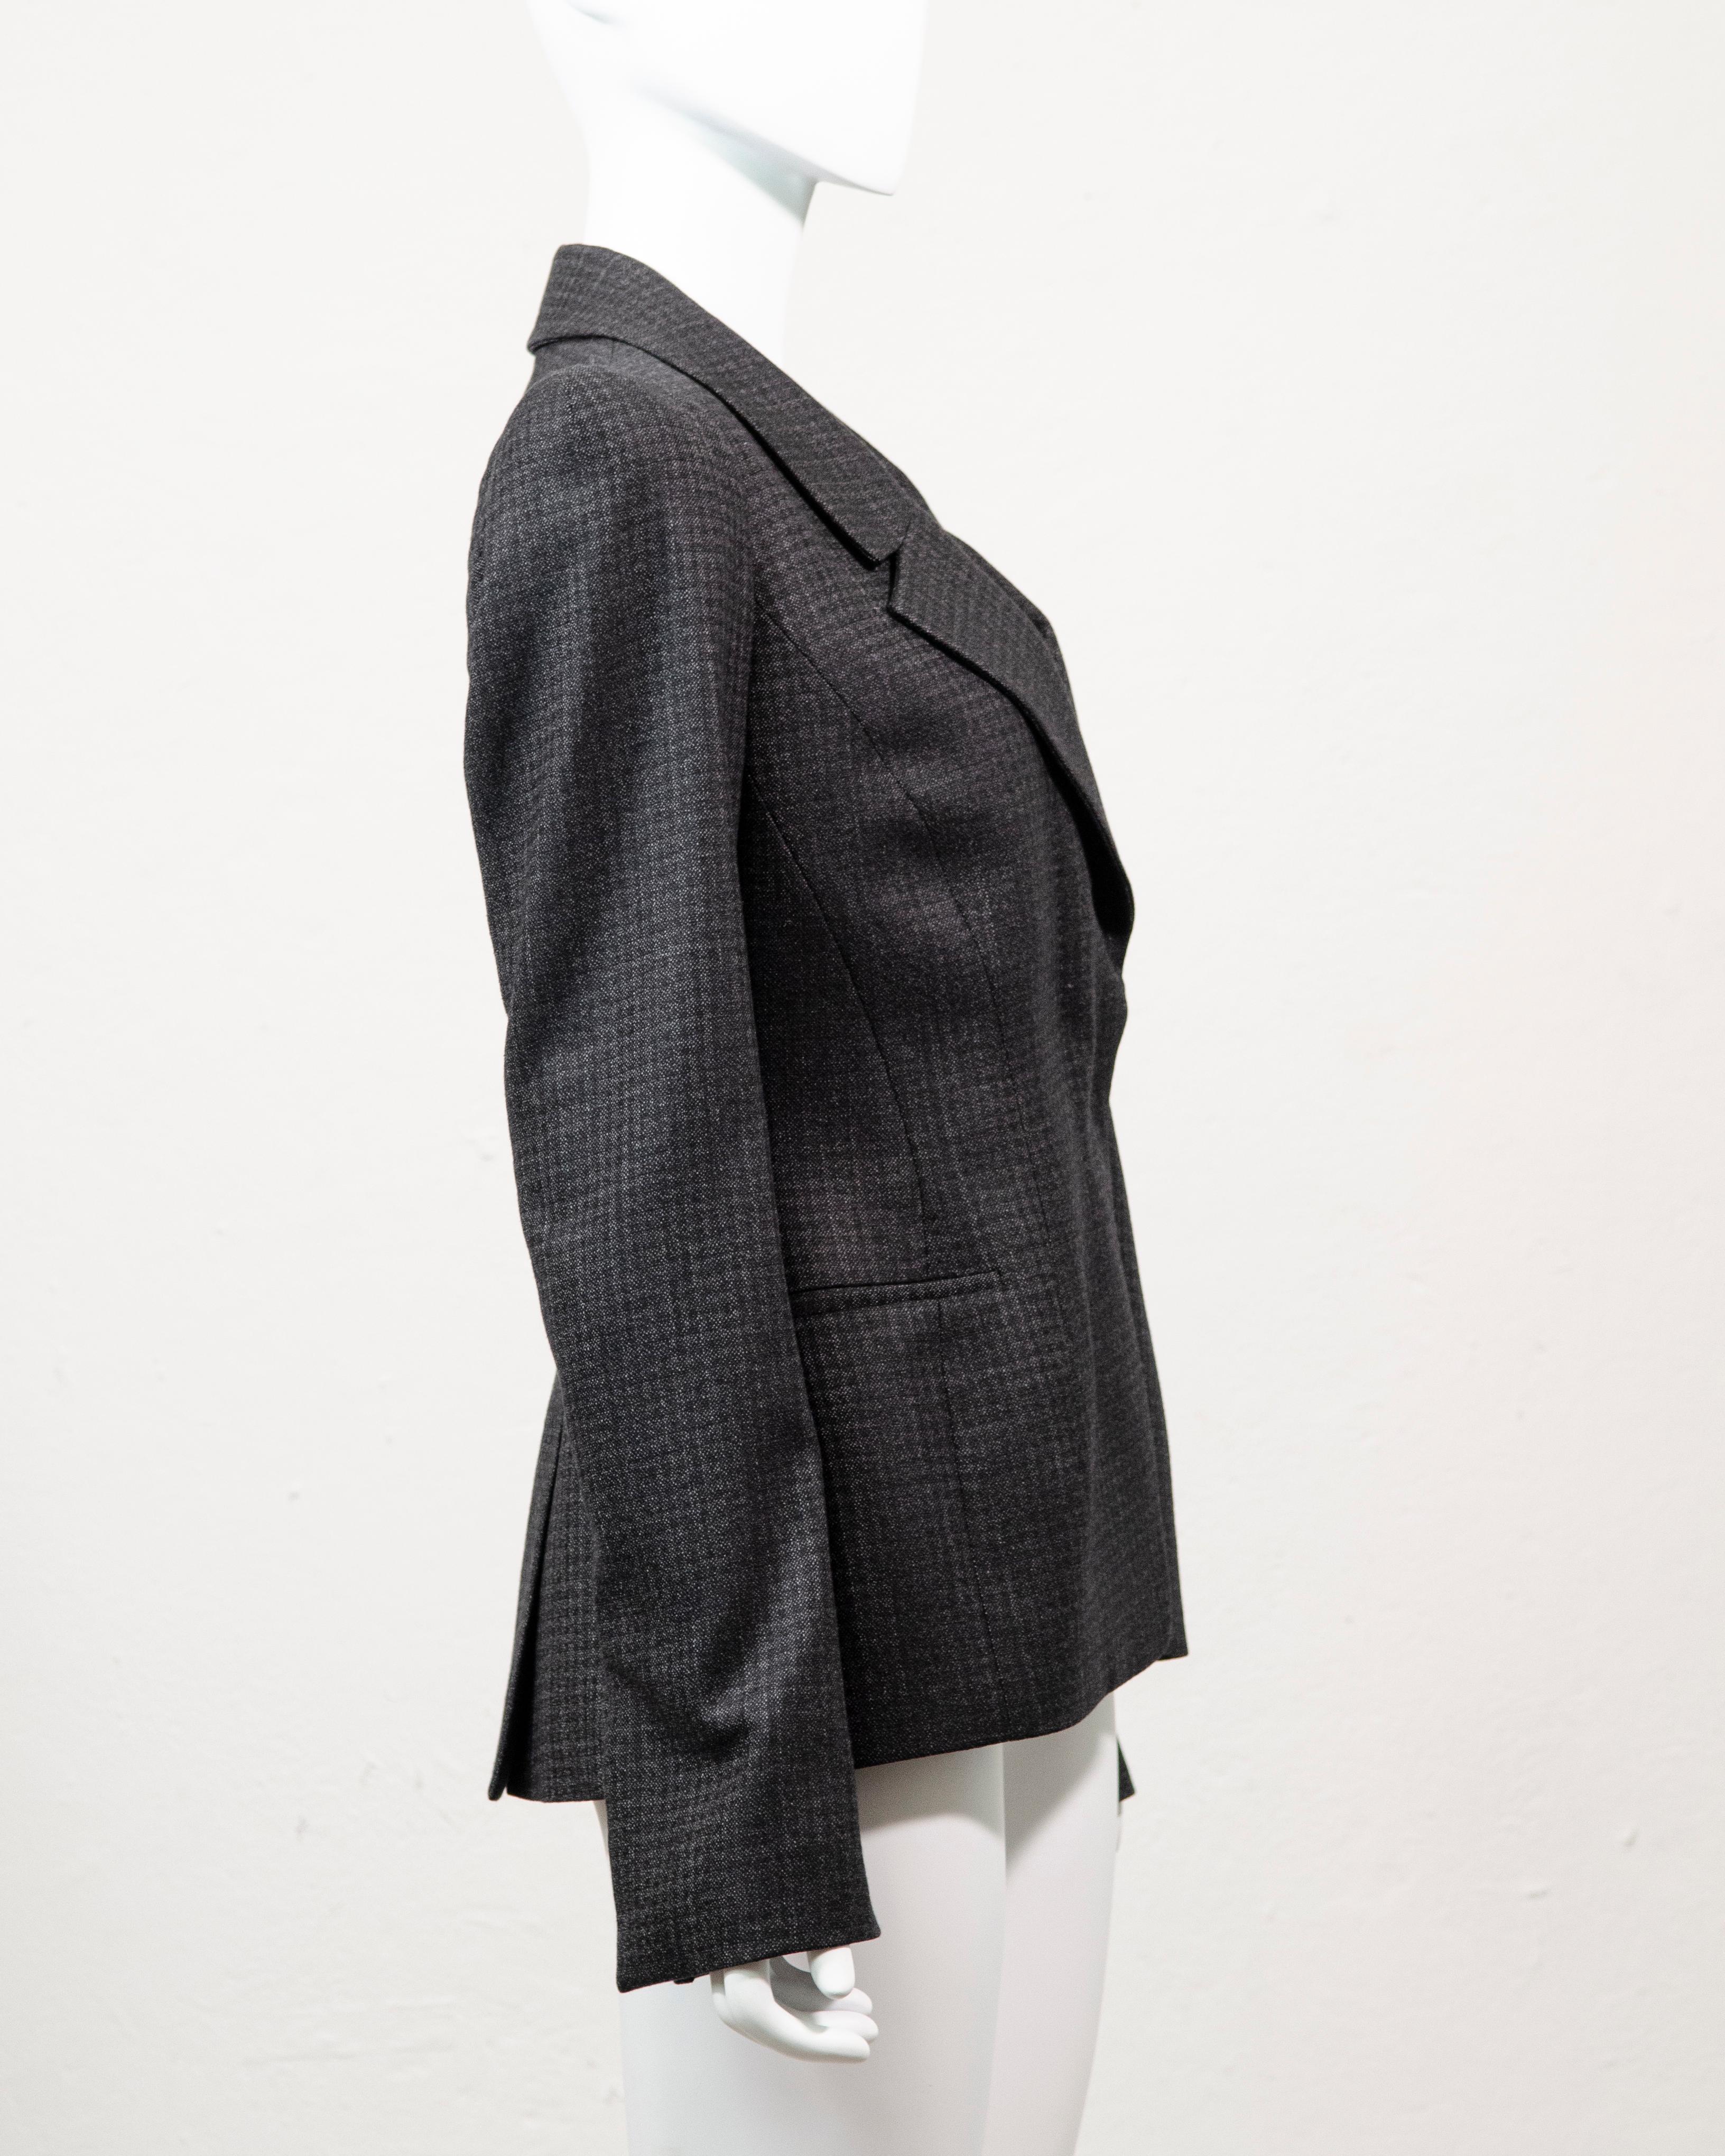 Women's or Men's Tom Ford Elegant Classic Tailored Blazer With Large Statement Shoulders